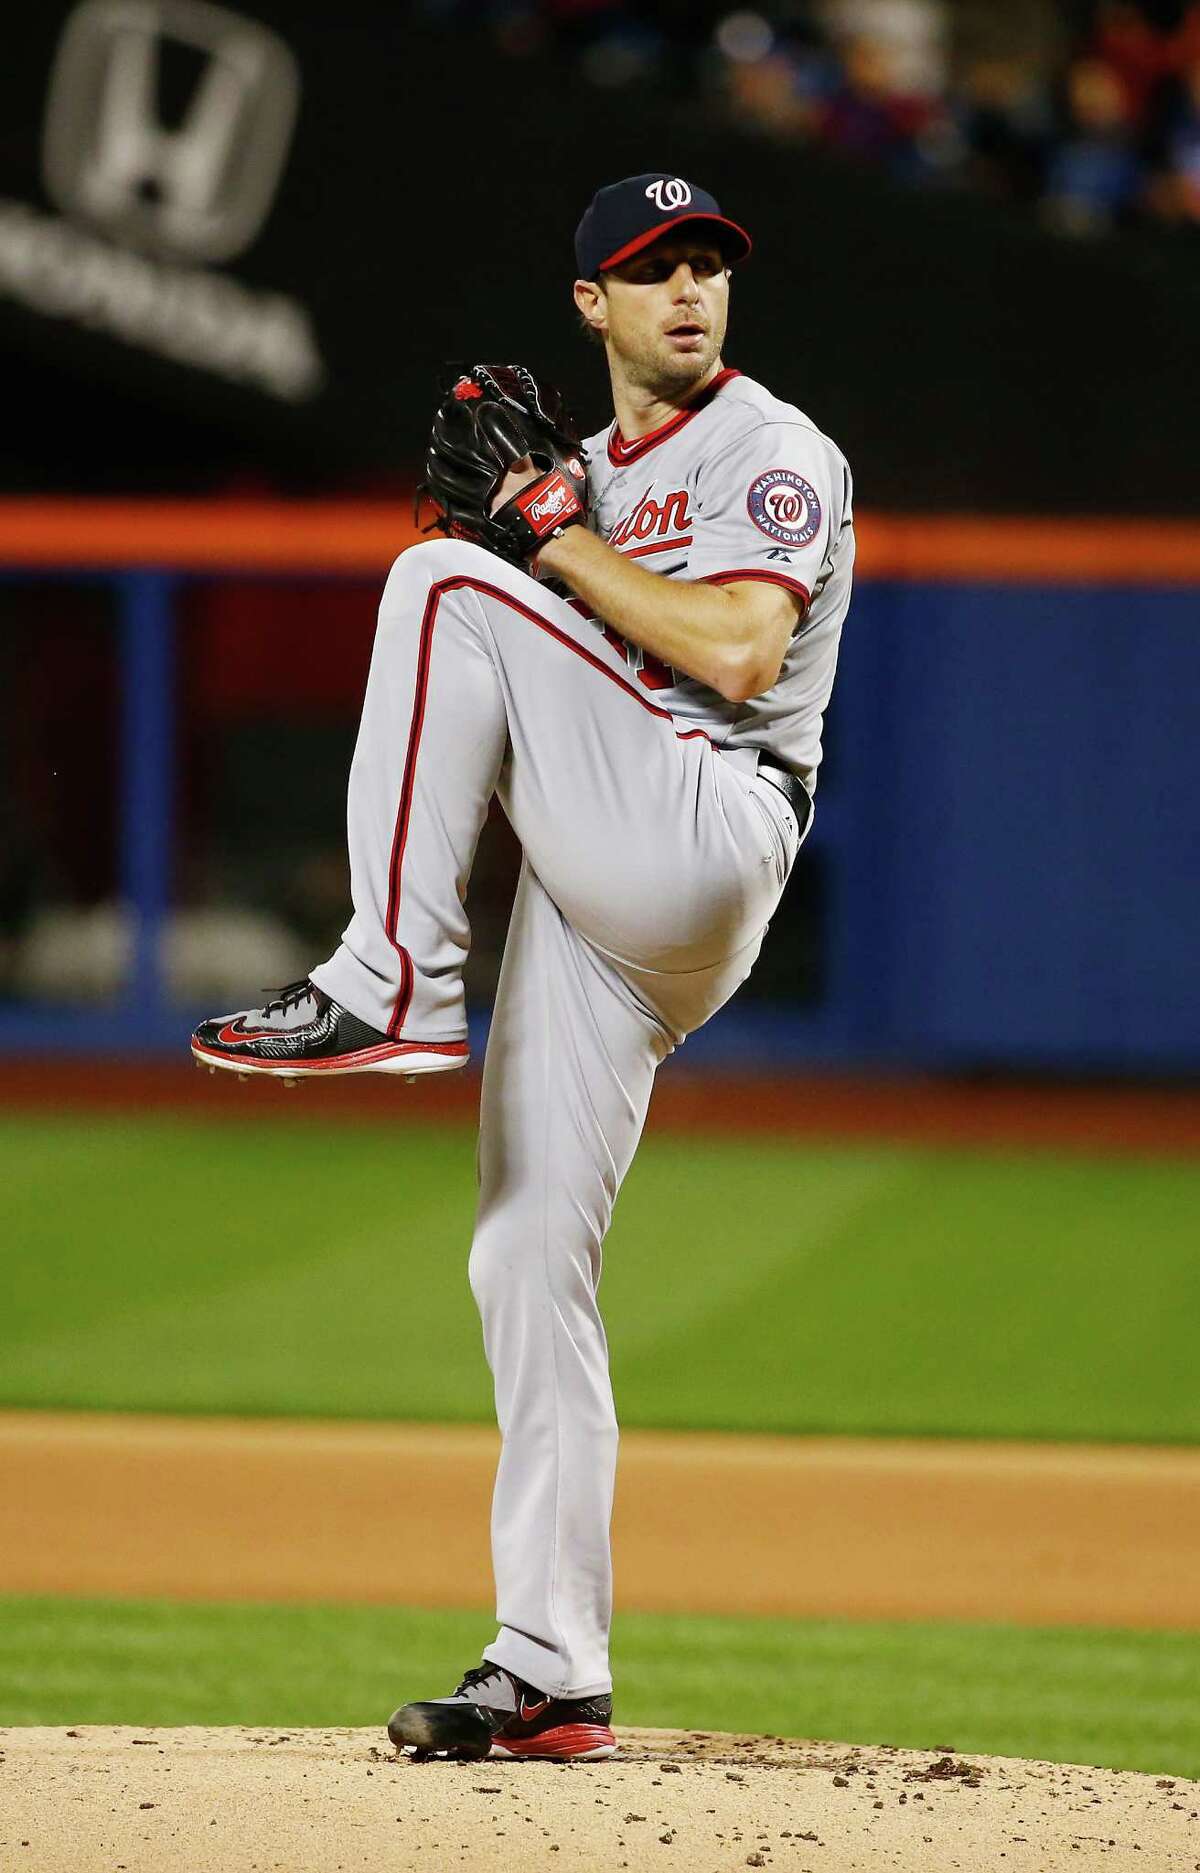 Max Scherzer's No-Hitter Will Cost the Mets - The New York Times